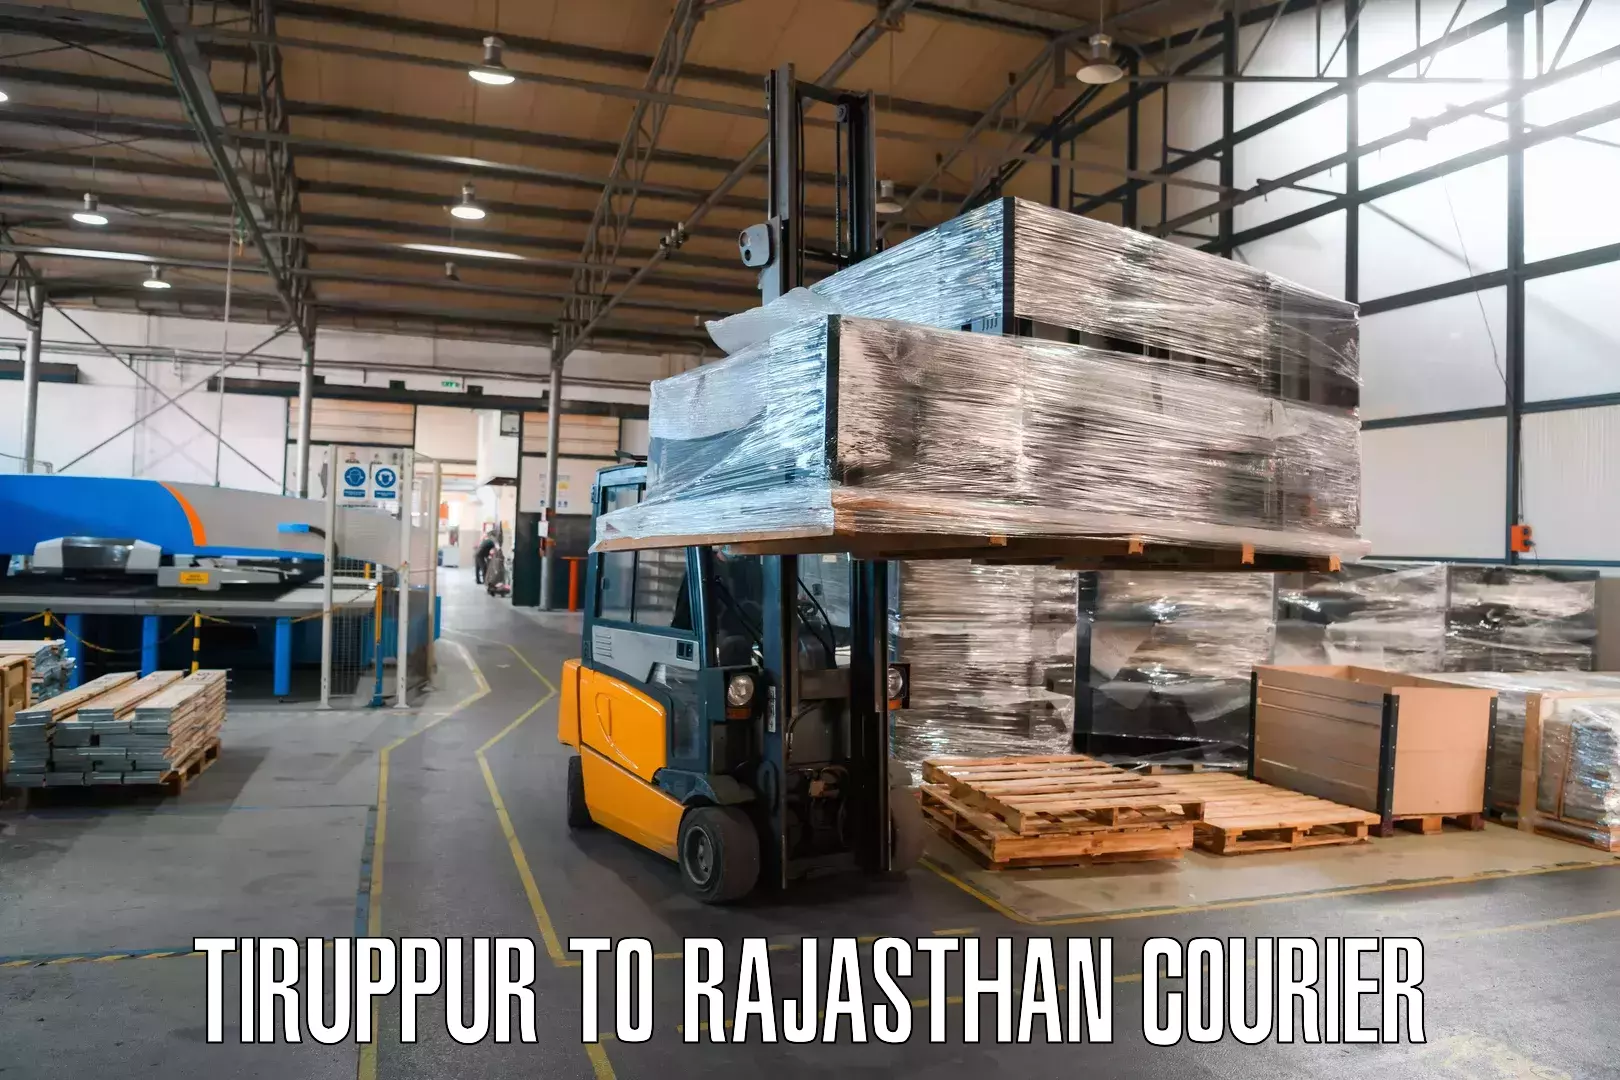 Reliable courier service Tiruppur to Buhana